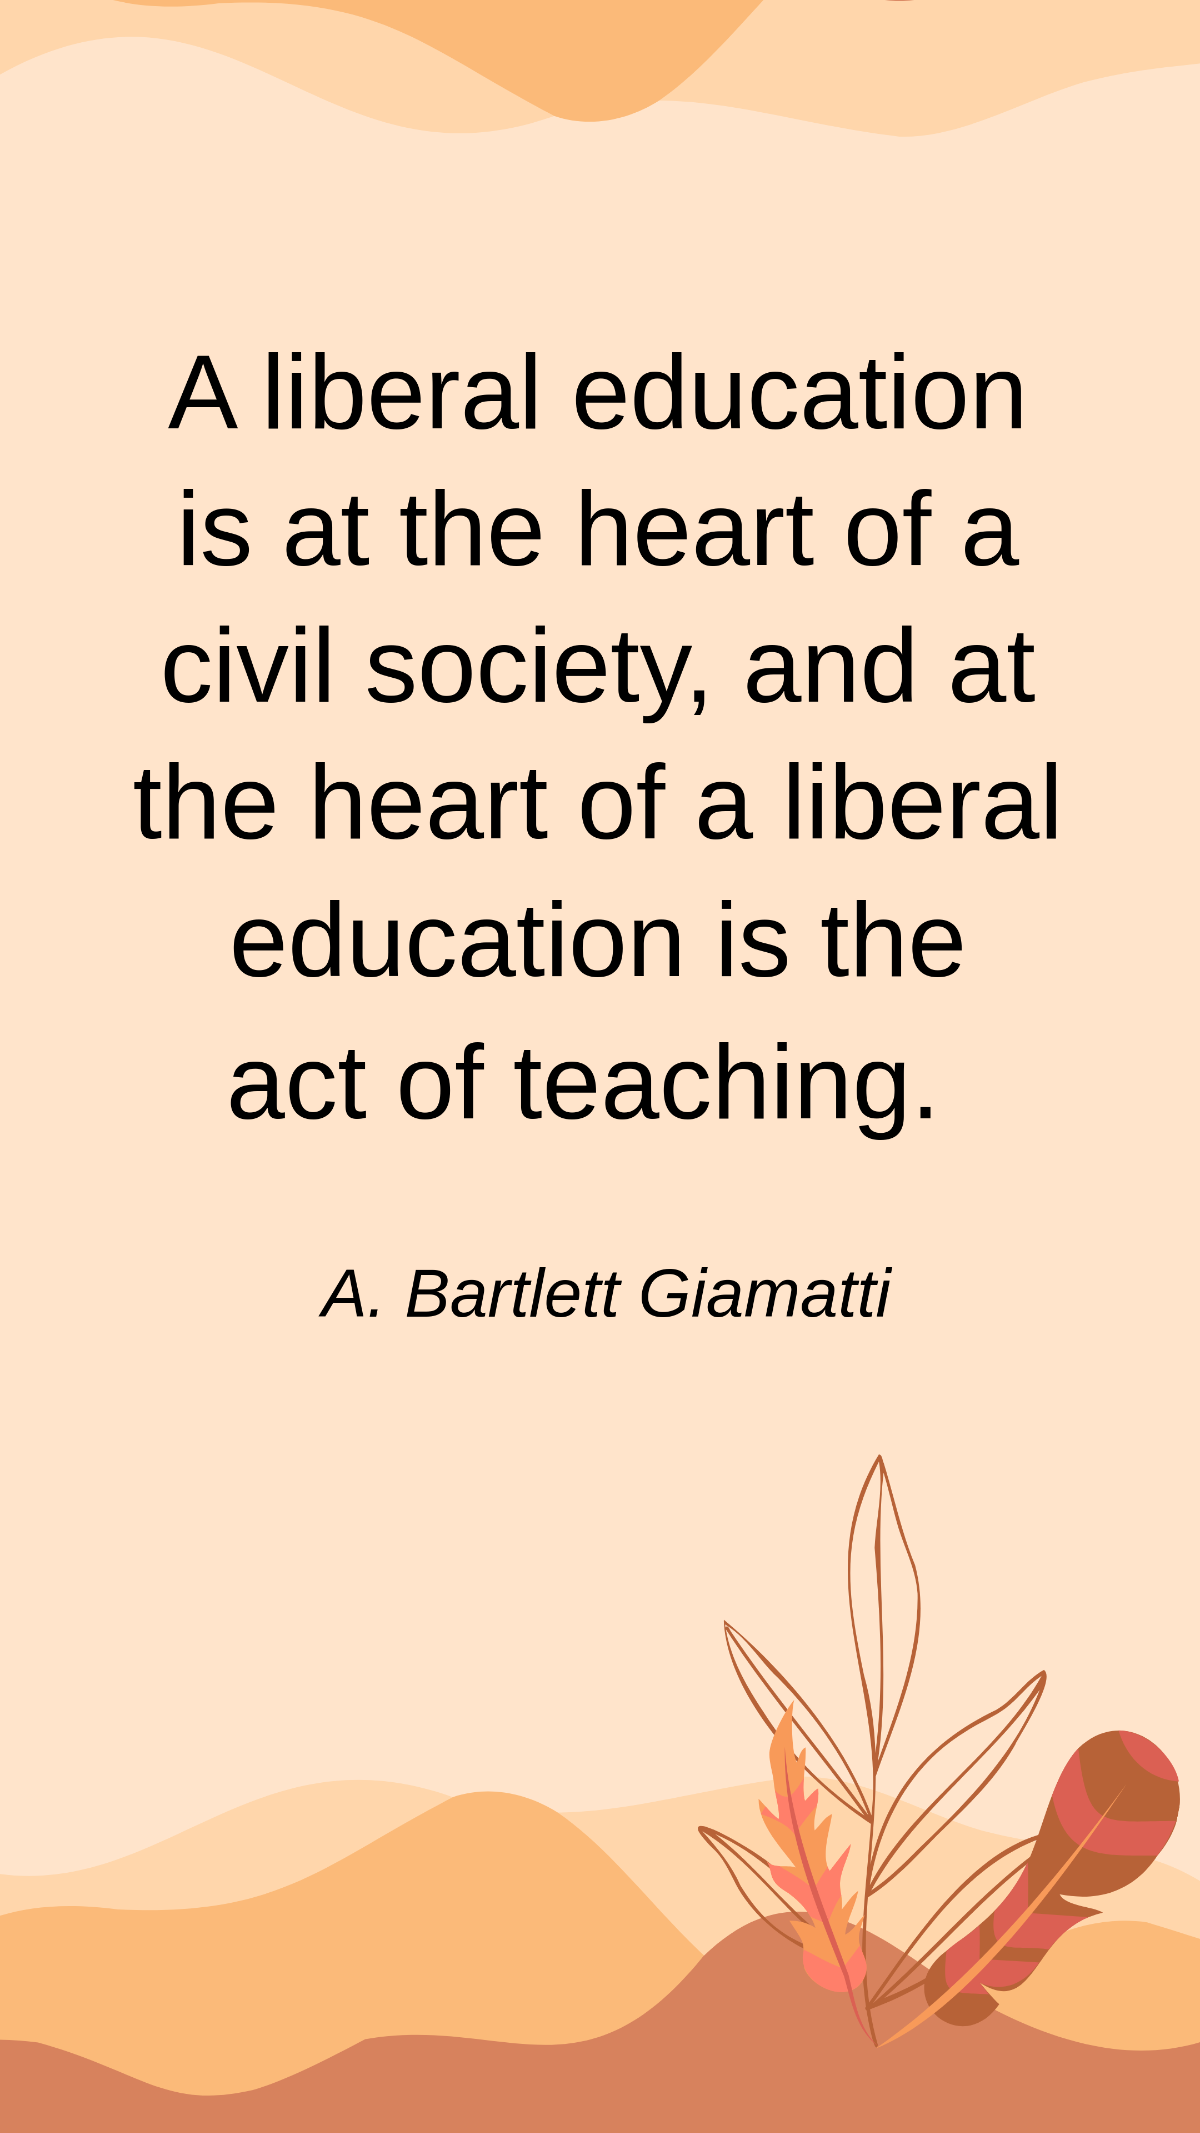 Free A. Bartlett Giamatti - A liberal education is at the heart of a civil society, and at the heart of a liberal education is the act of teaching. Template